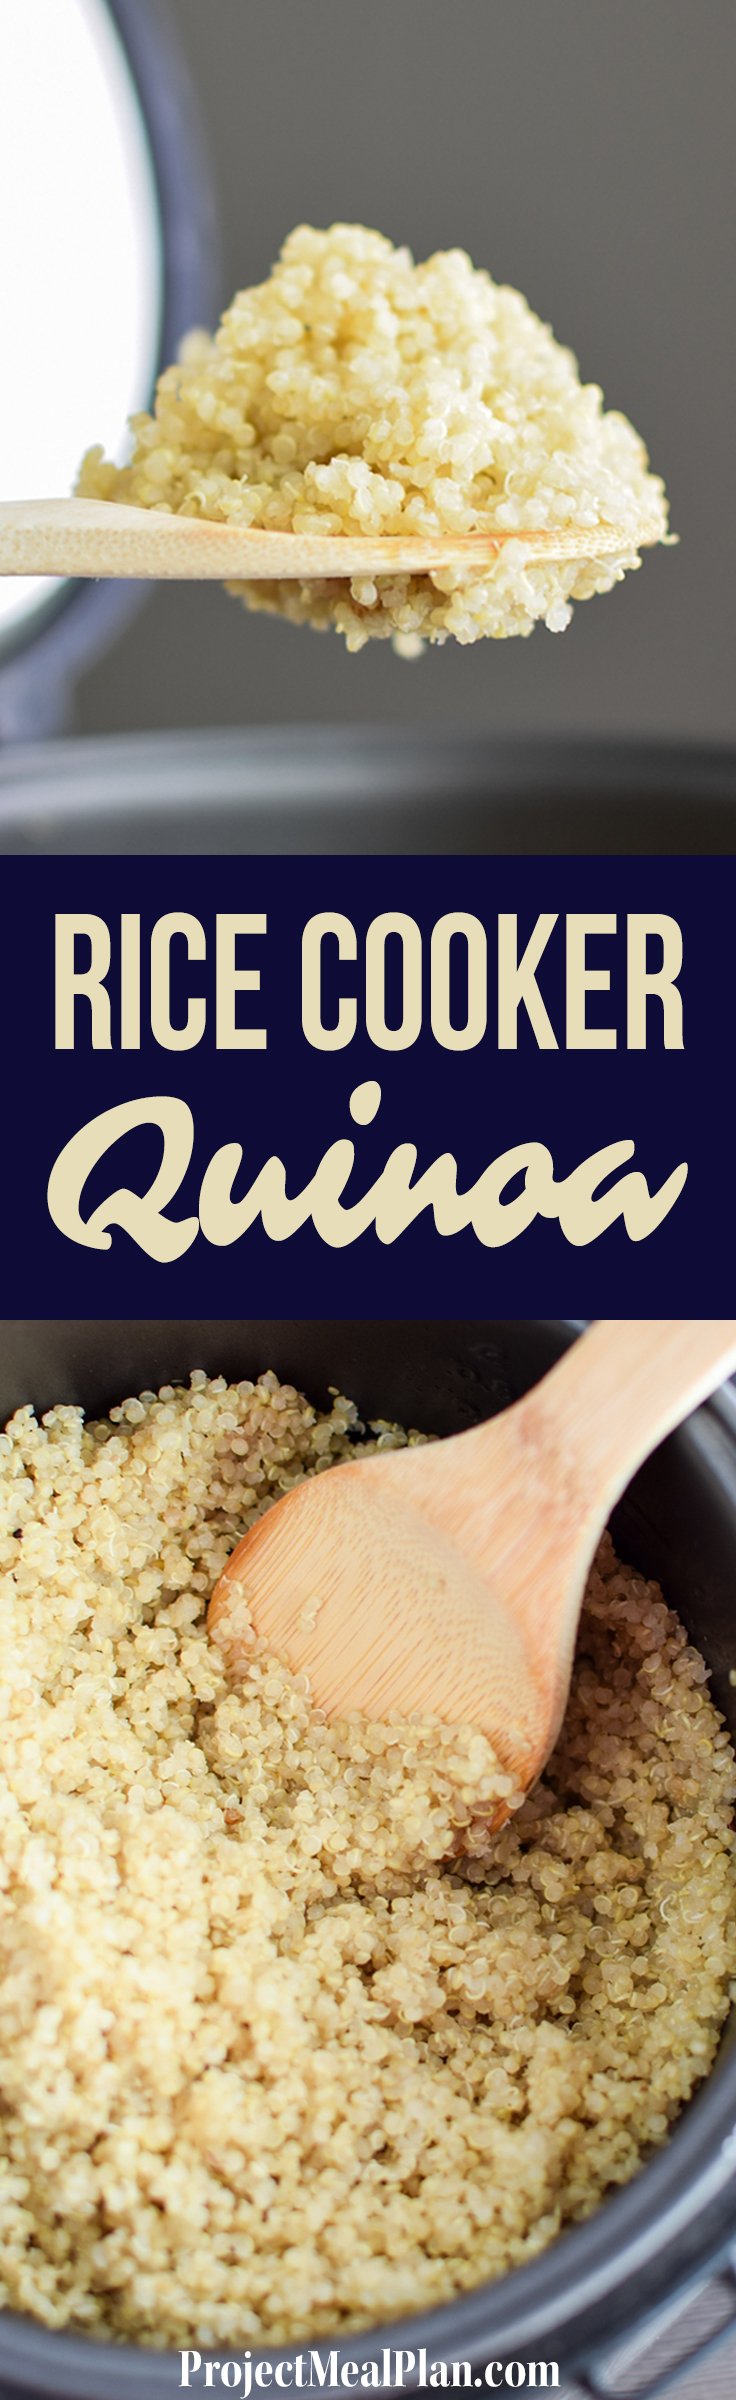 How to Cook Quinoa in the Rice Cooker - A simple explanation of how to make the EASIEST quinoa ever, in your rice cooker! - ProjectMealPlan.com